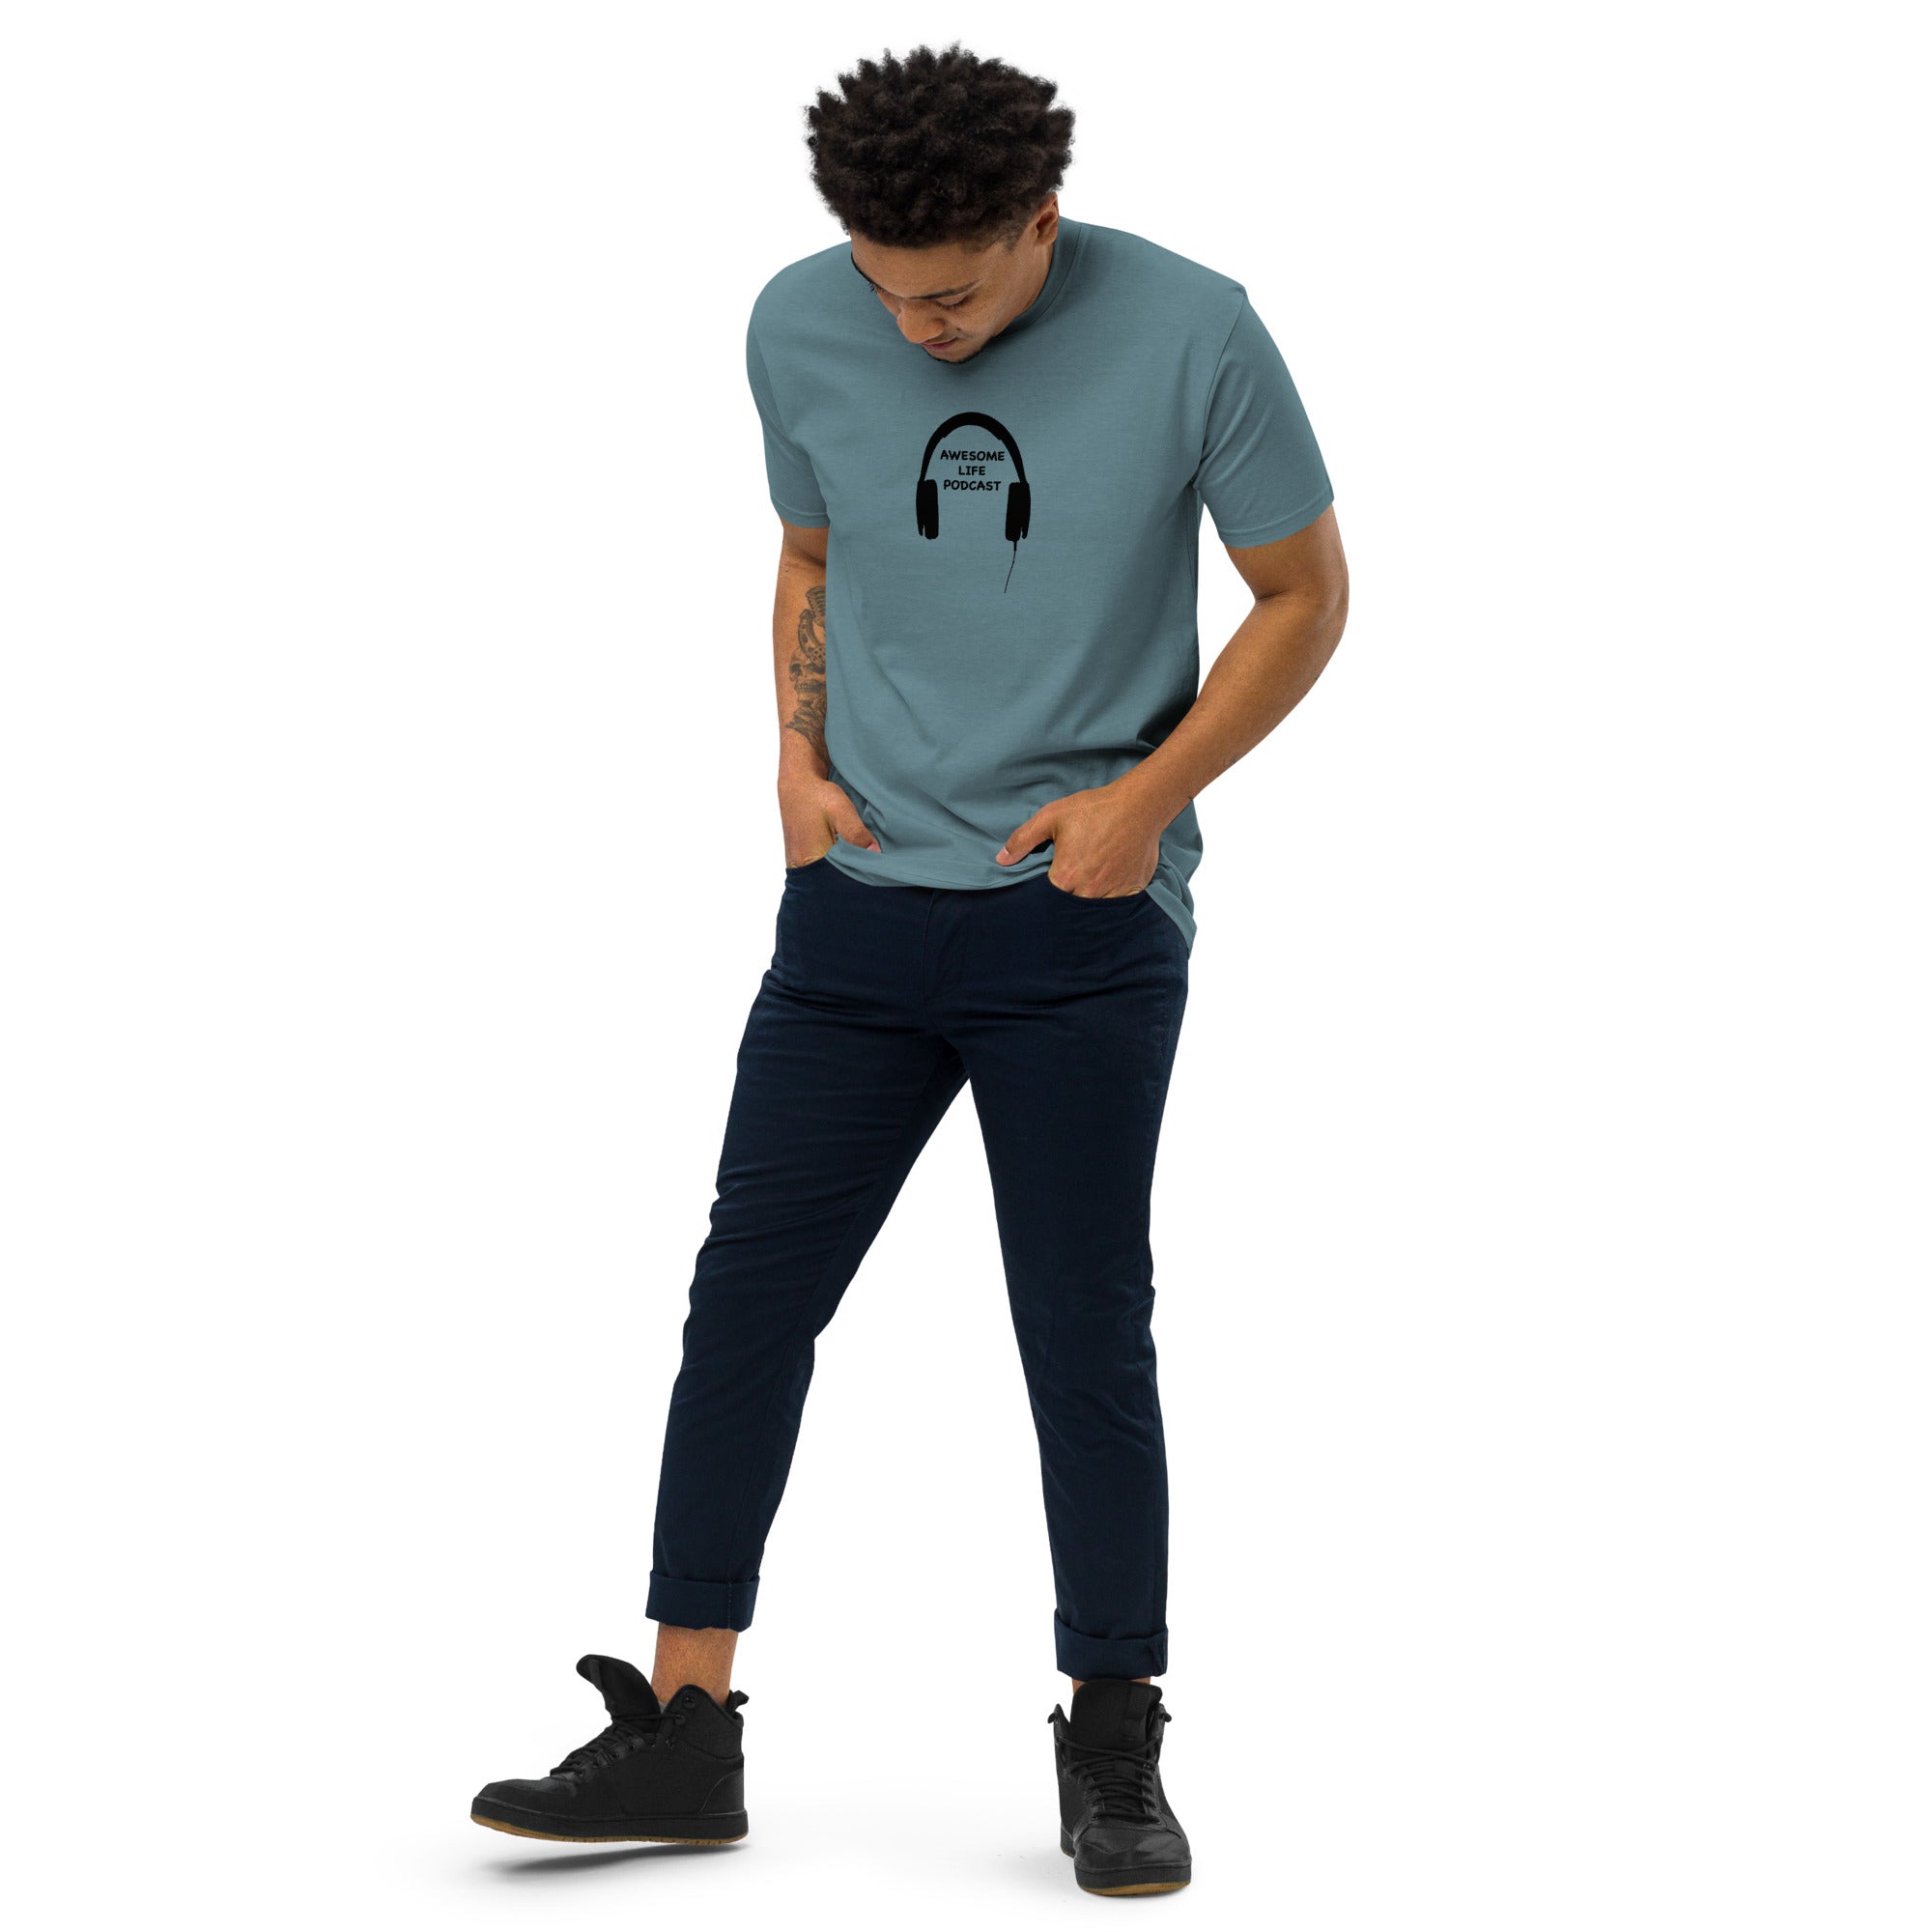 Awesomelife Podcast Men’s premium heavyweight tee